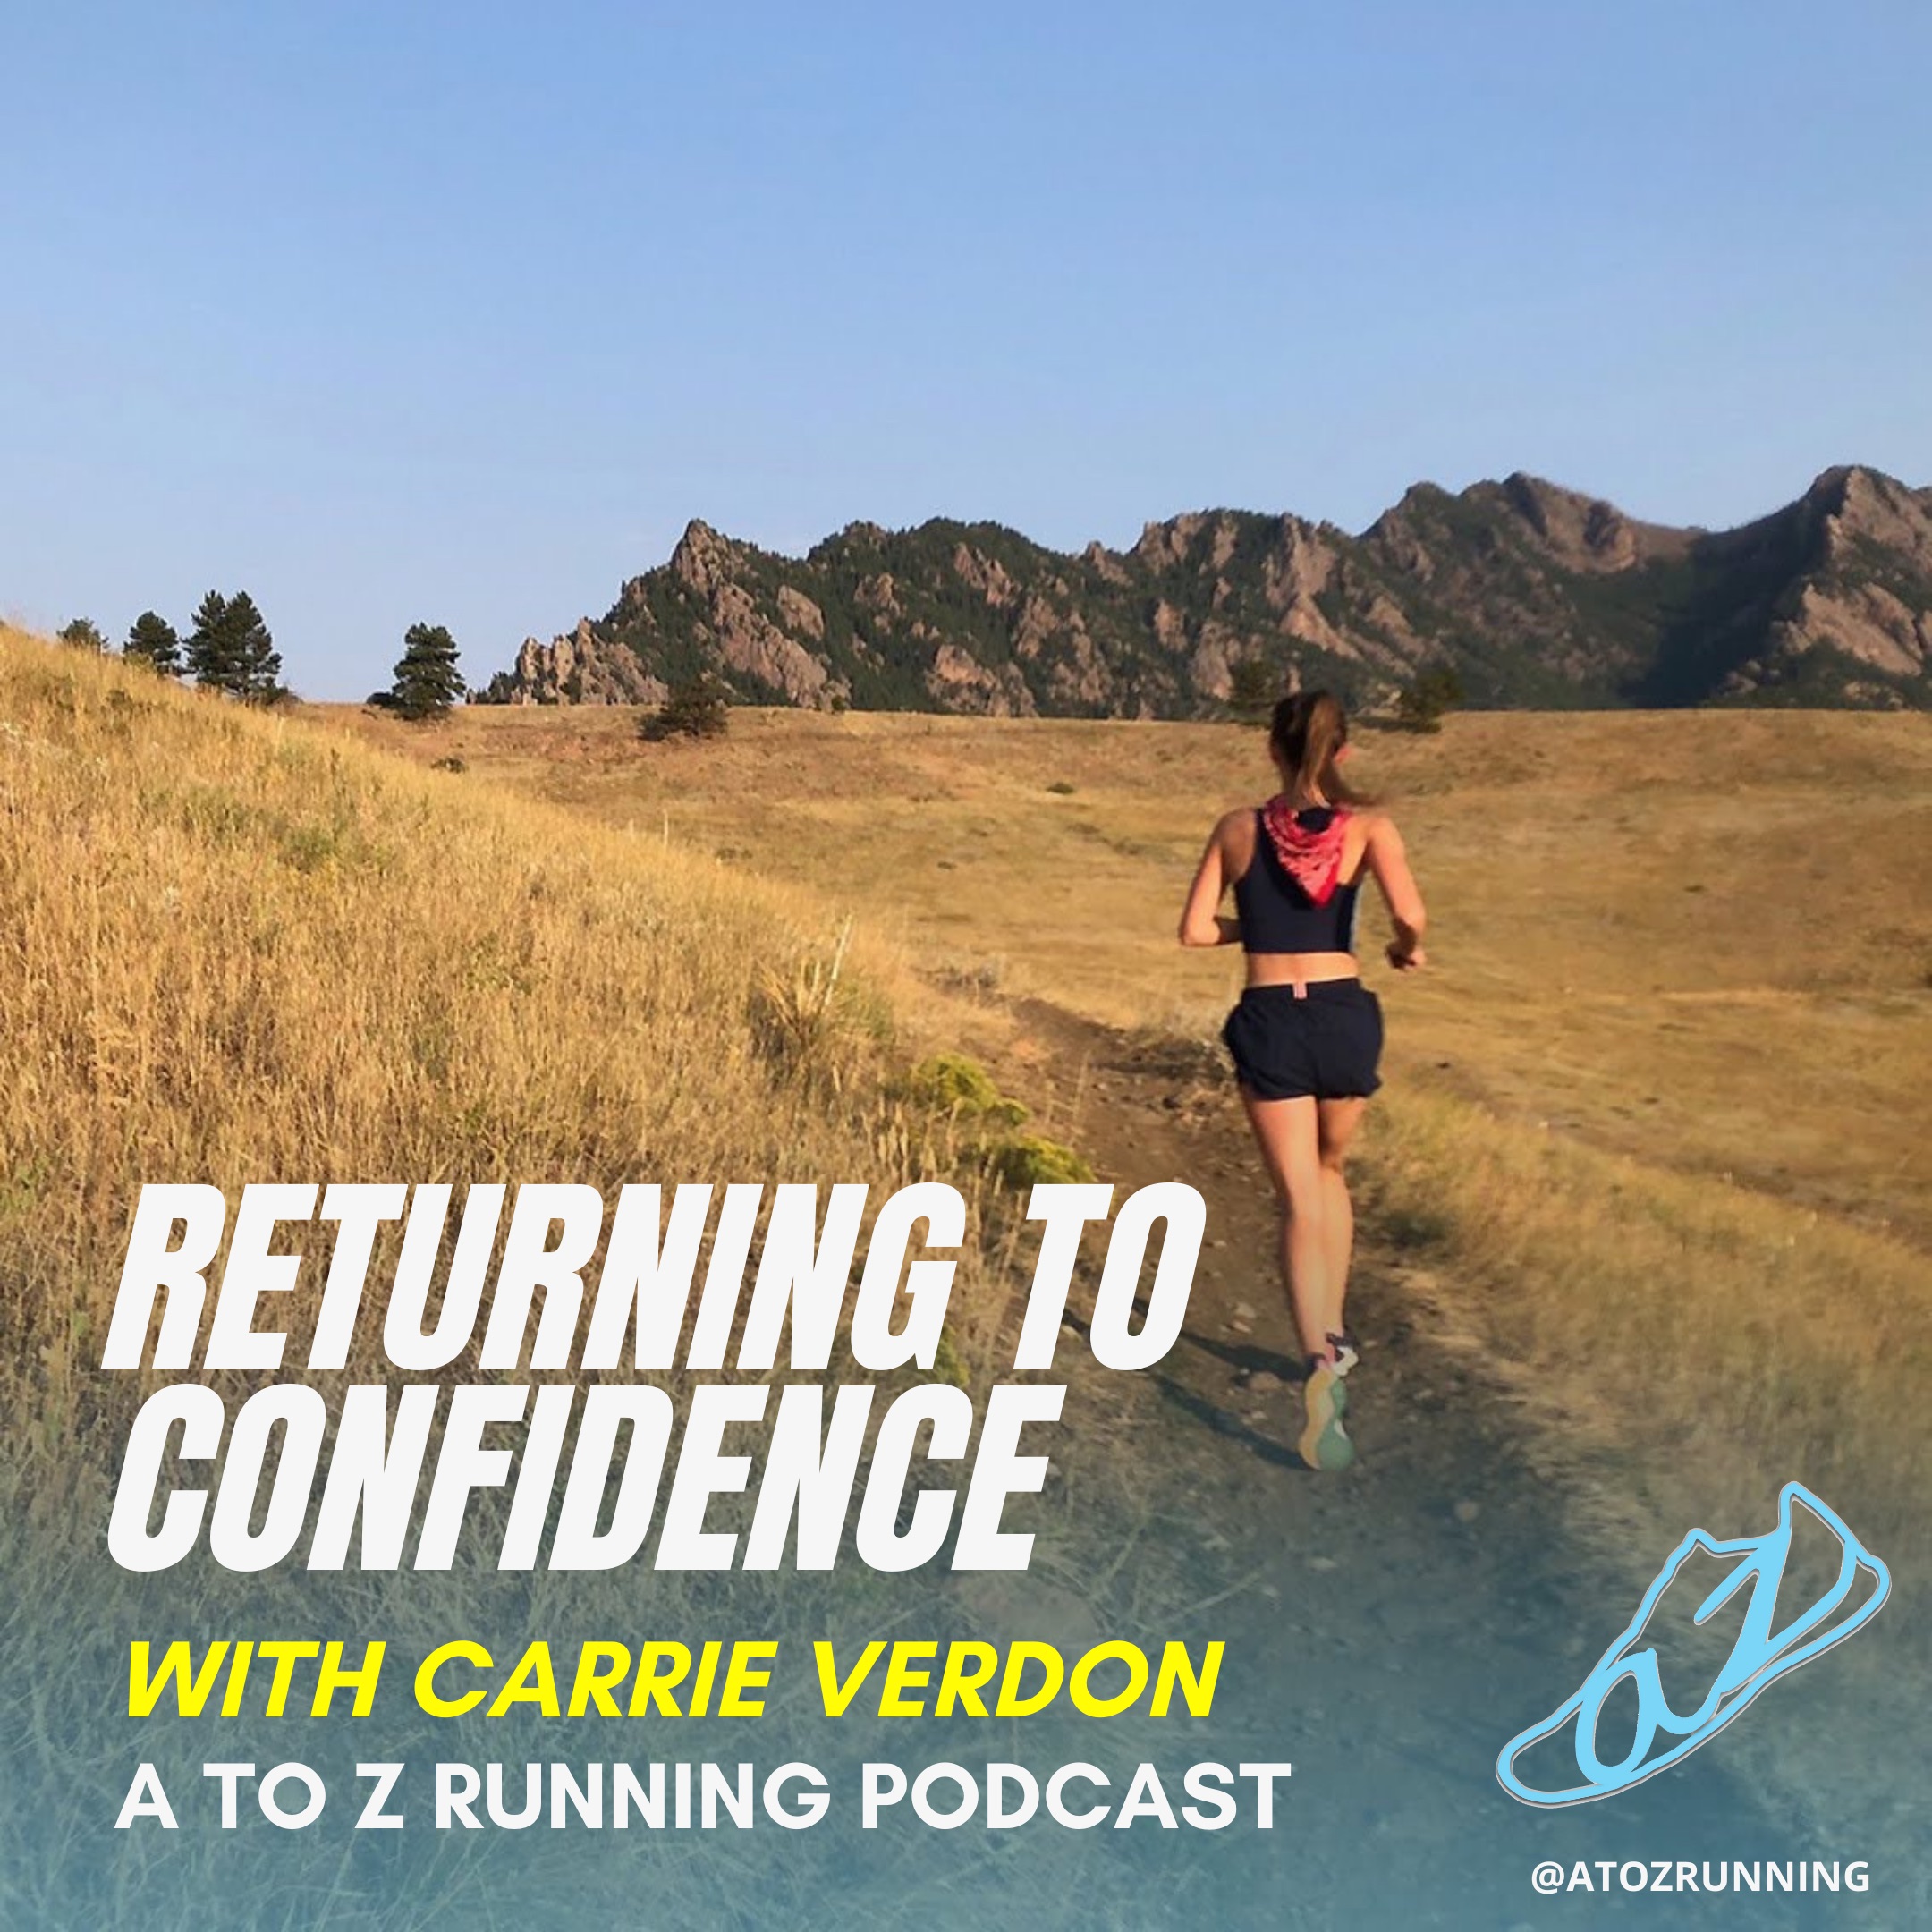 returning to confidence with carrie verdon, carrie running on a dirt path in the mountains